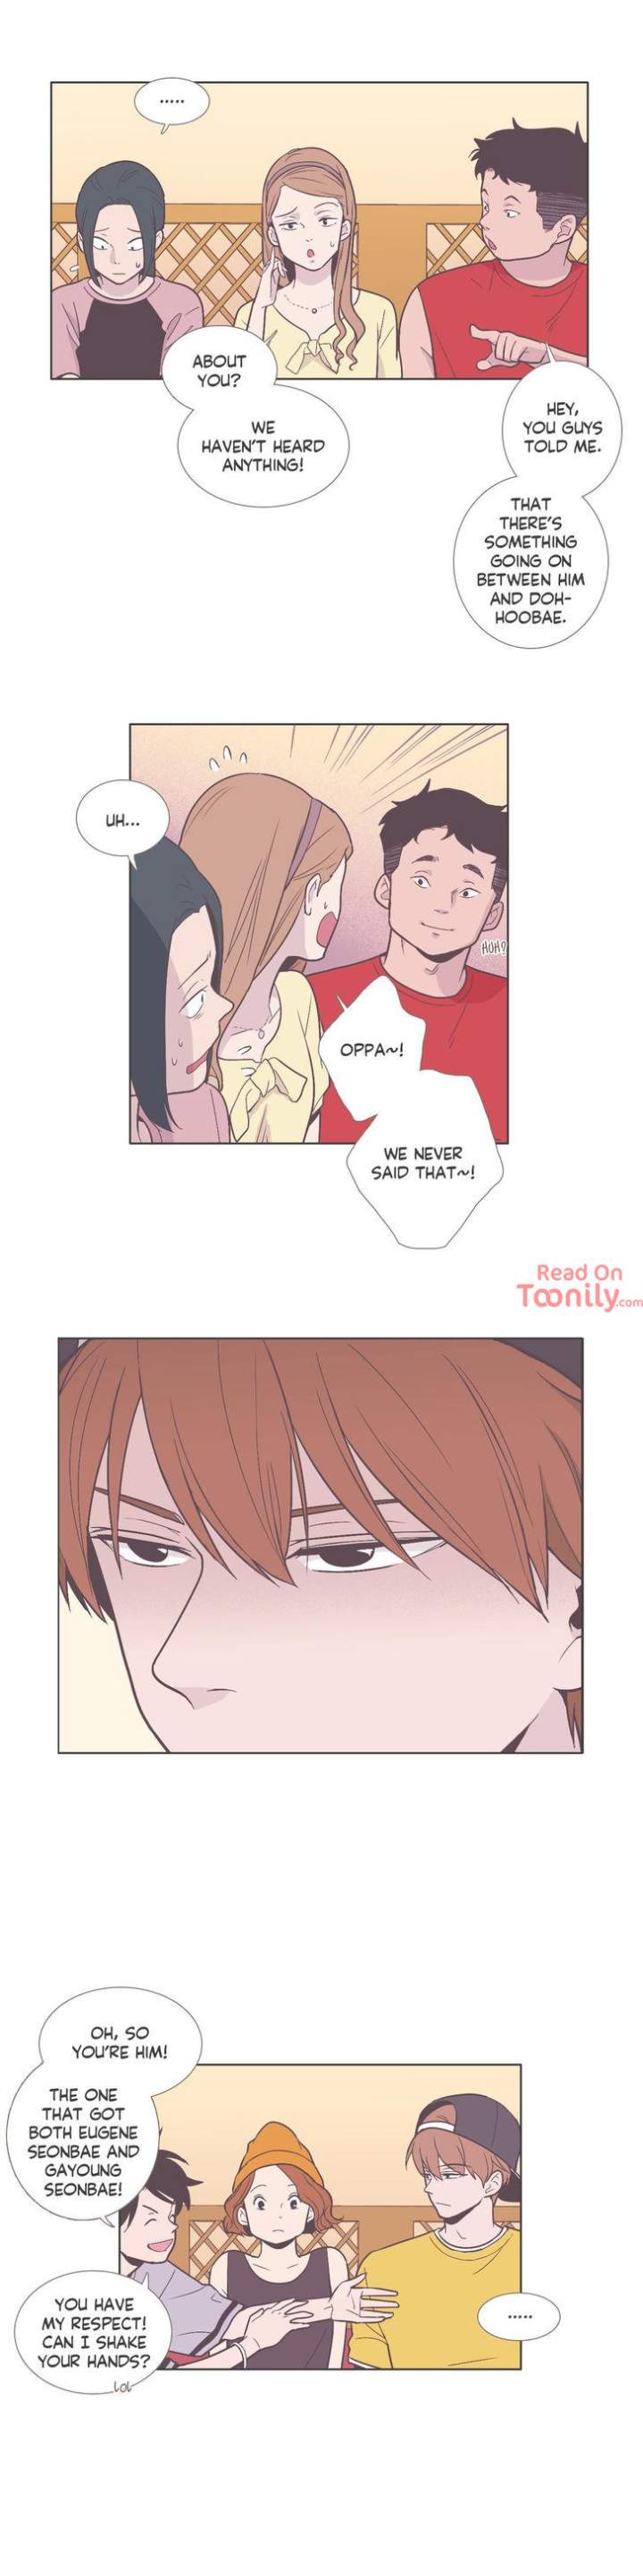 Something About Us - Chapter 47 Page 6